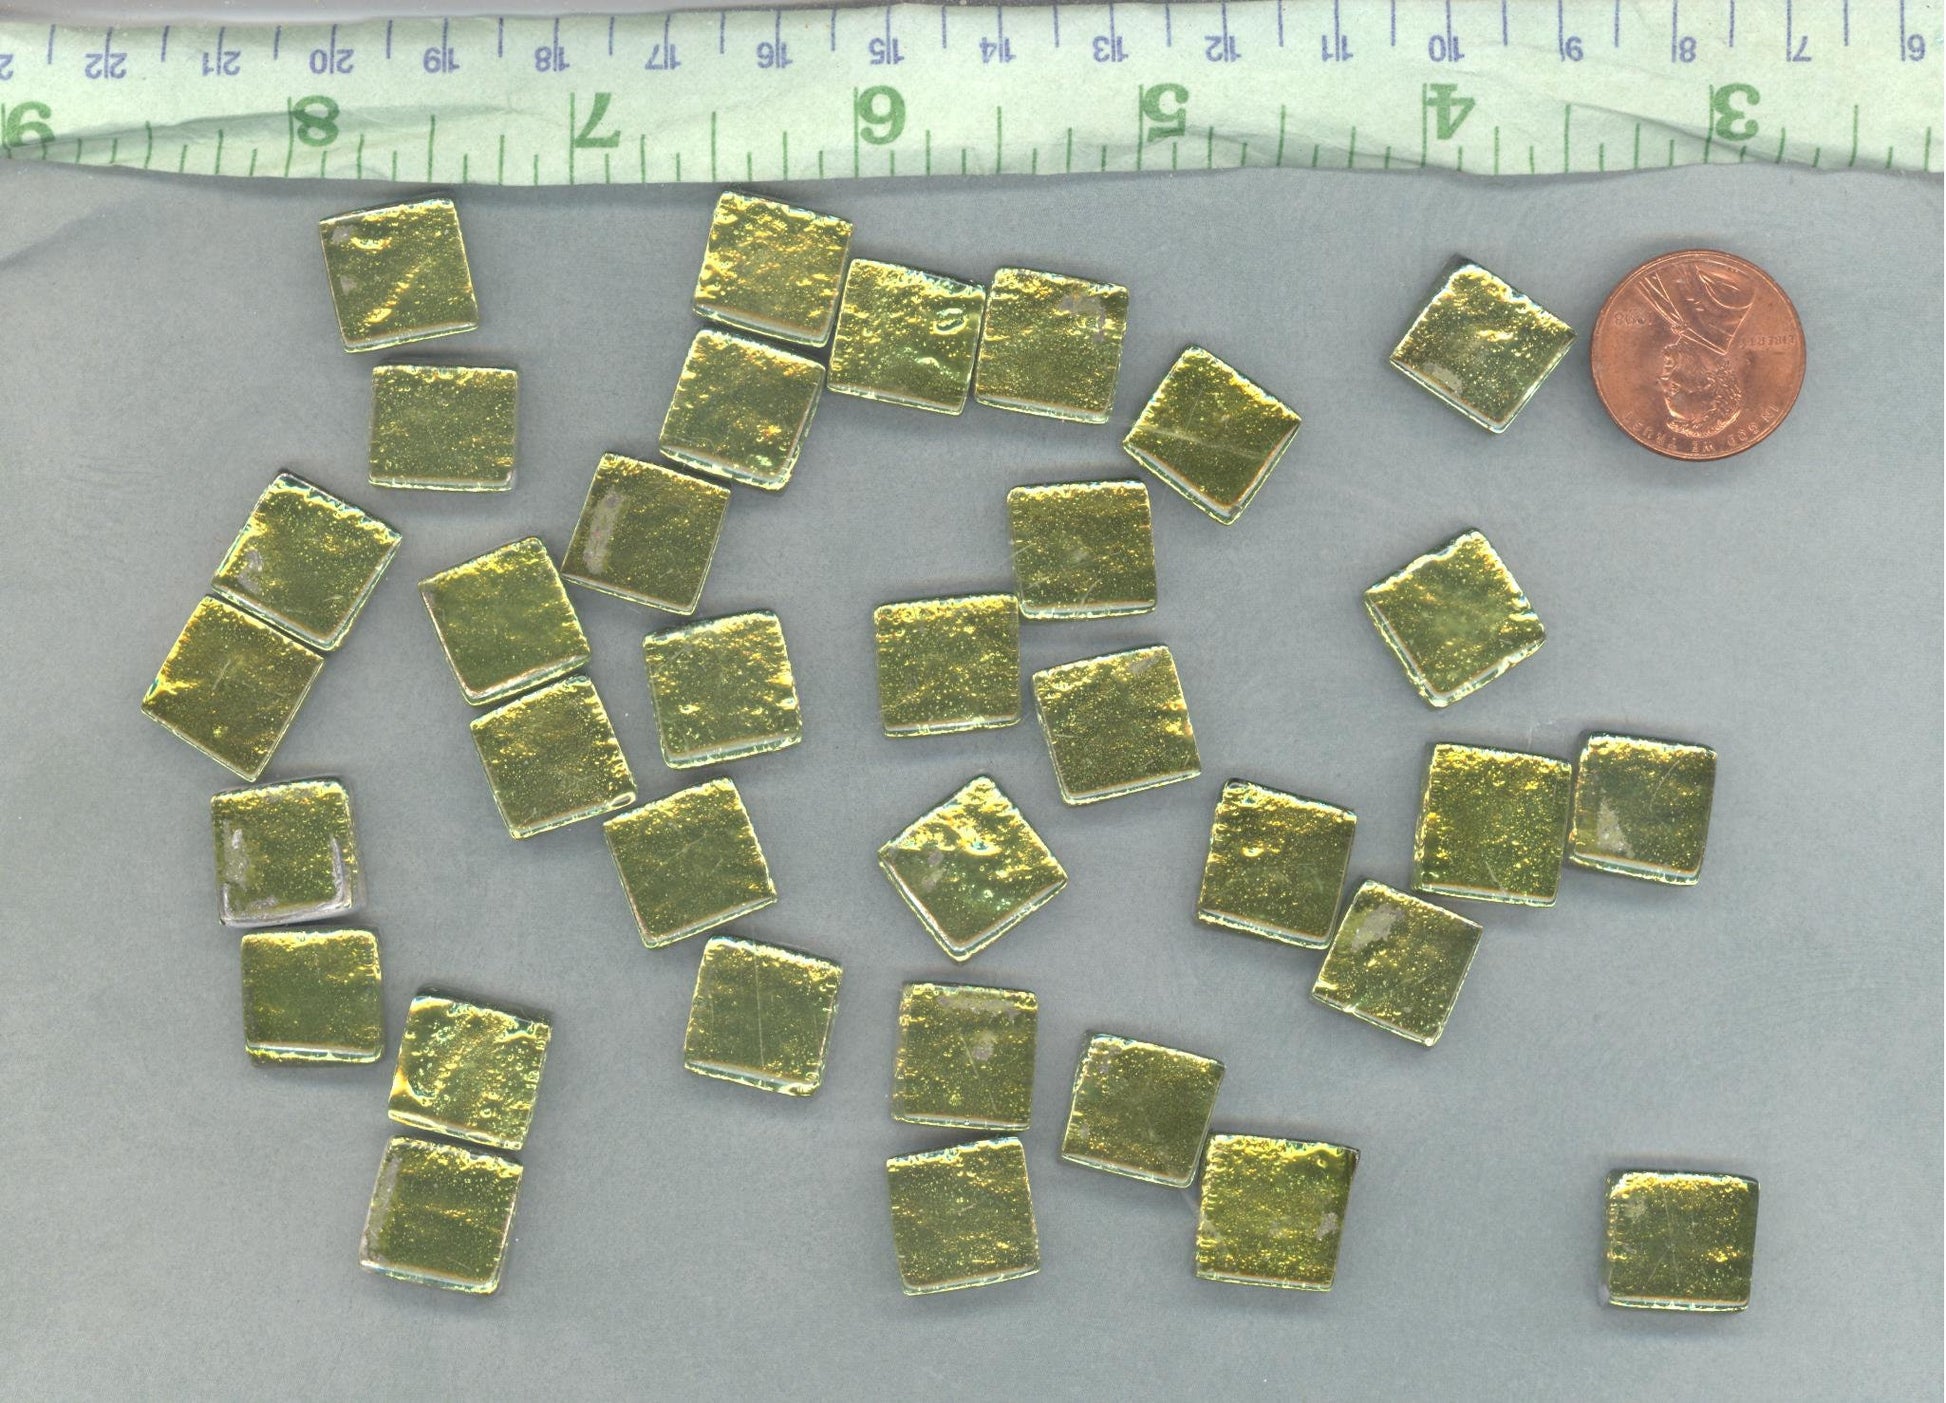 Green Foil Square Crystal Tiles - 12mm - 50g Metallic Glass Tiles in Chartreuse